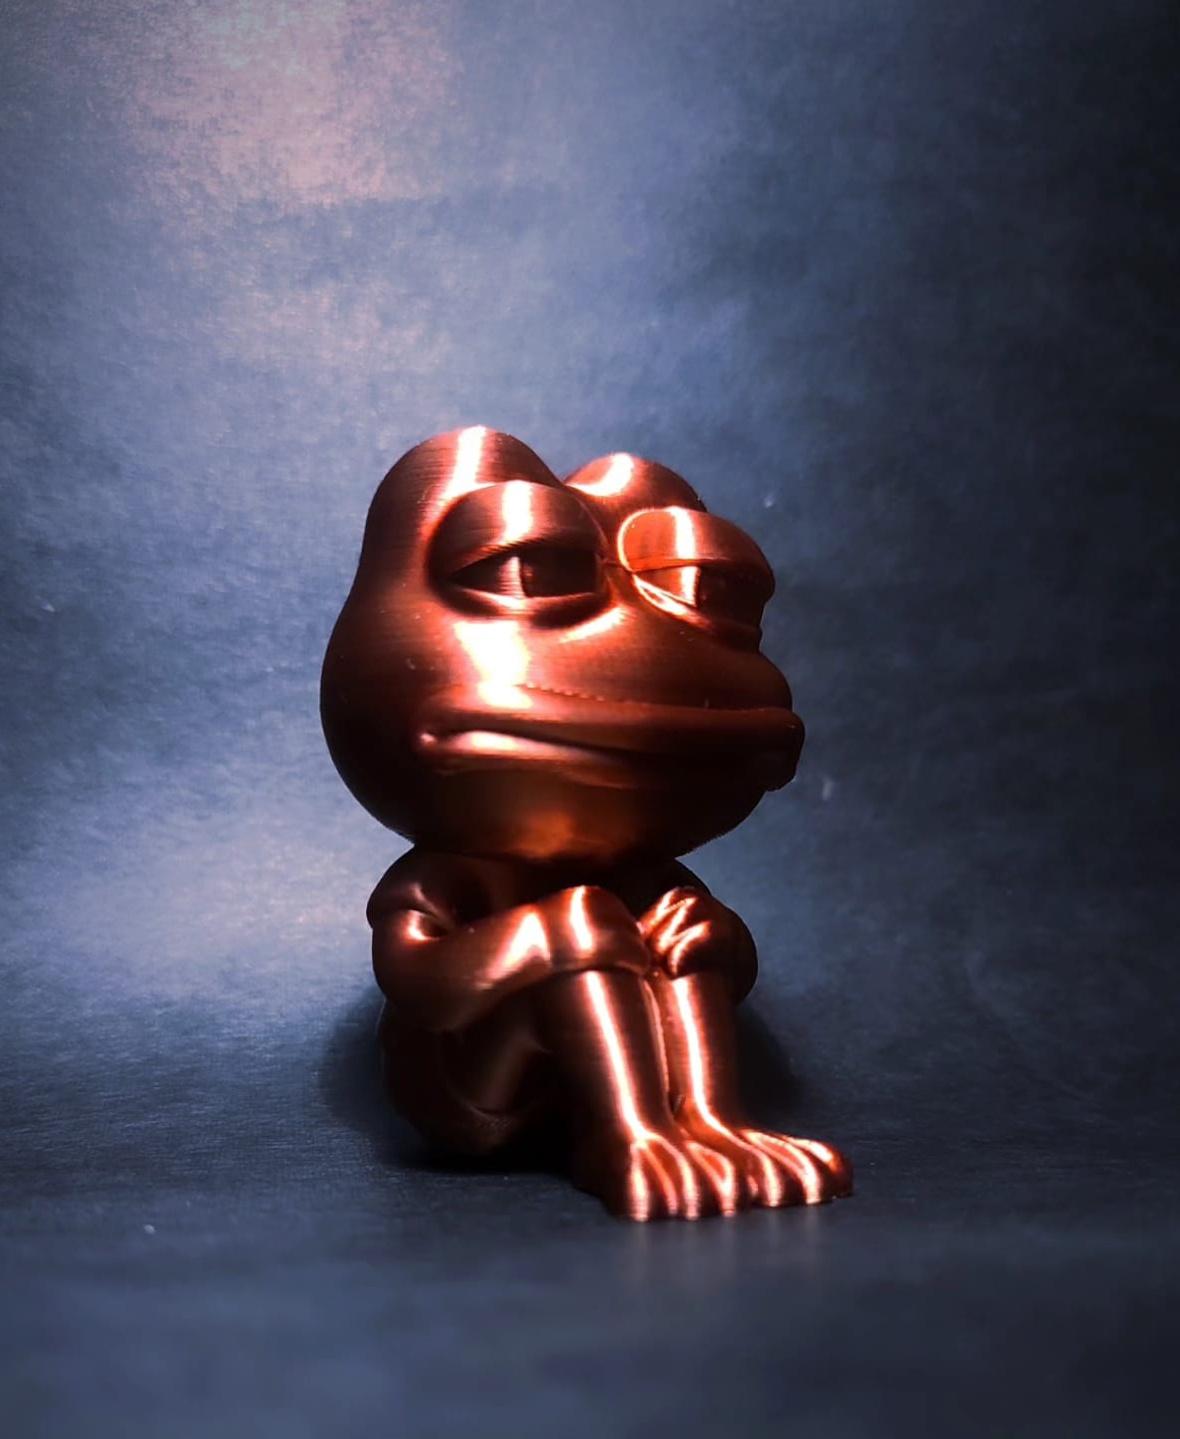 Pepe the frog 3d model